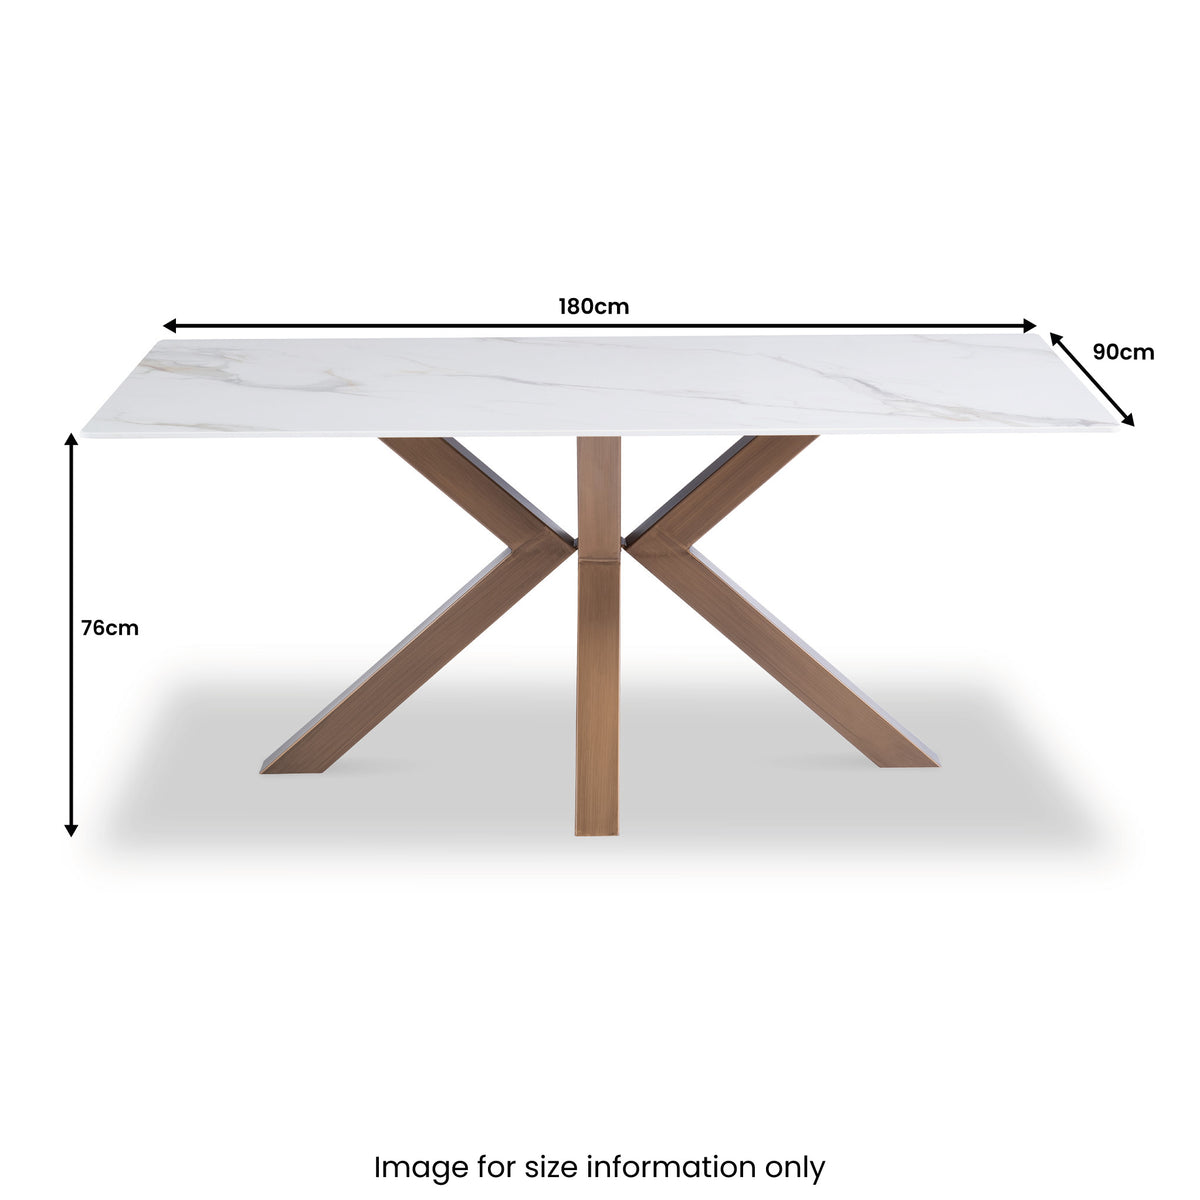 Bowman White & Gold 180cm Sintered Stone Dining Table veining